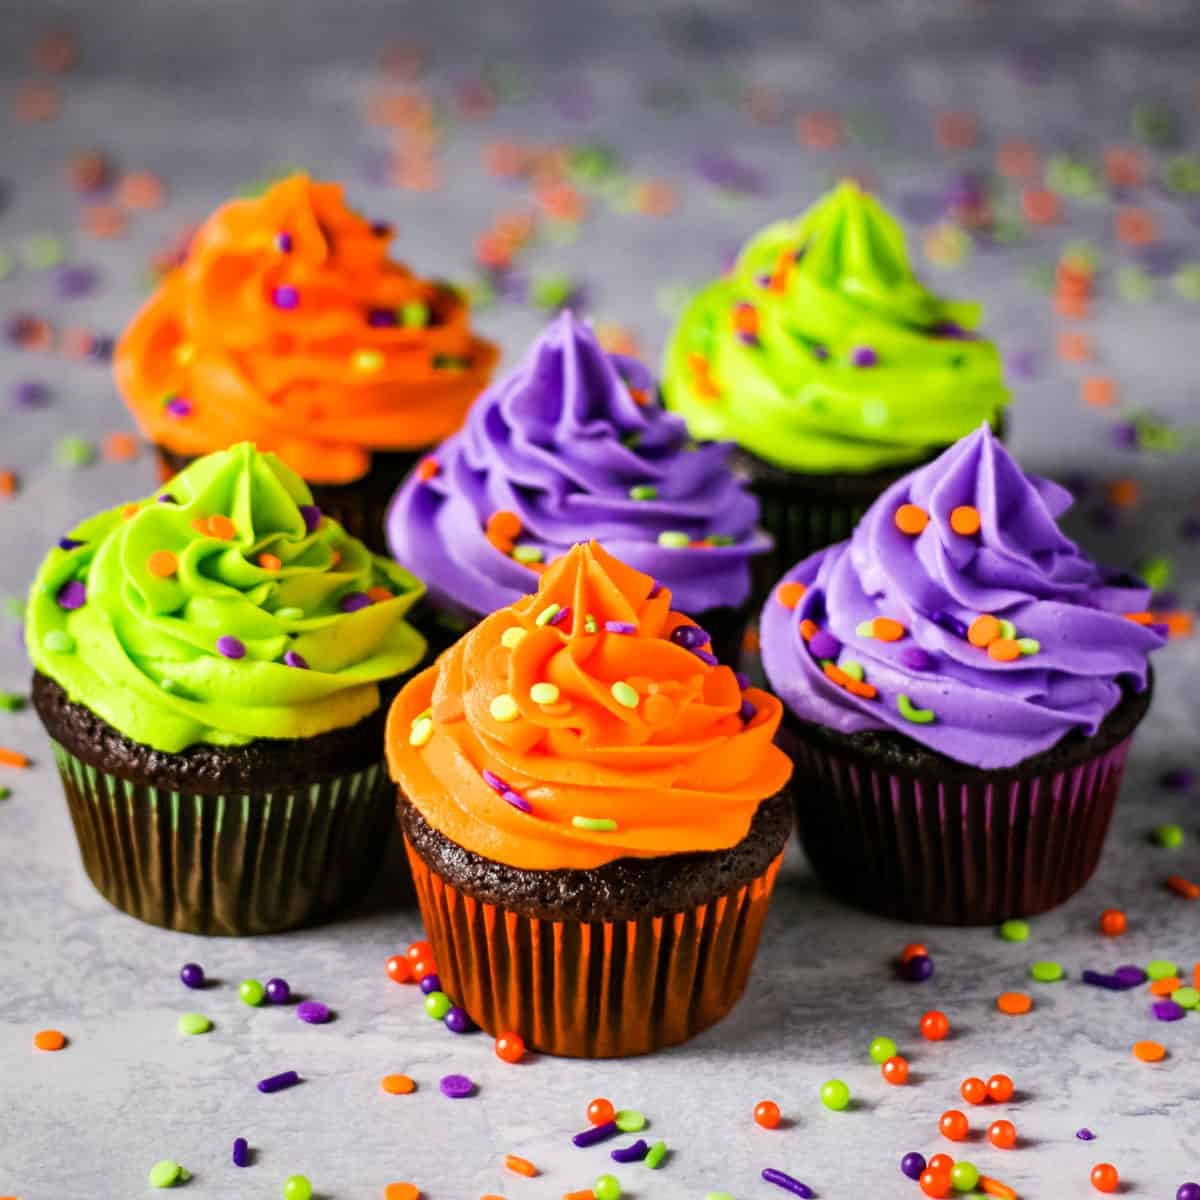 Halloween themed chocolate cupcakes topped with neon green, orange, and purple colored buttercream with sprinkles on a concrete table.